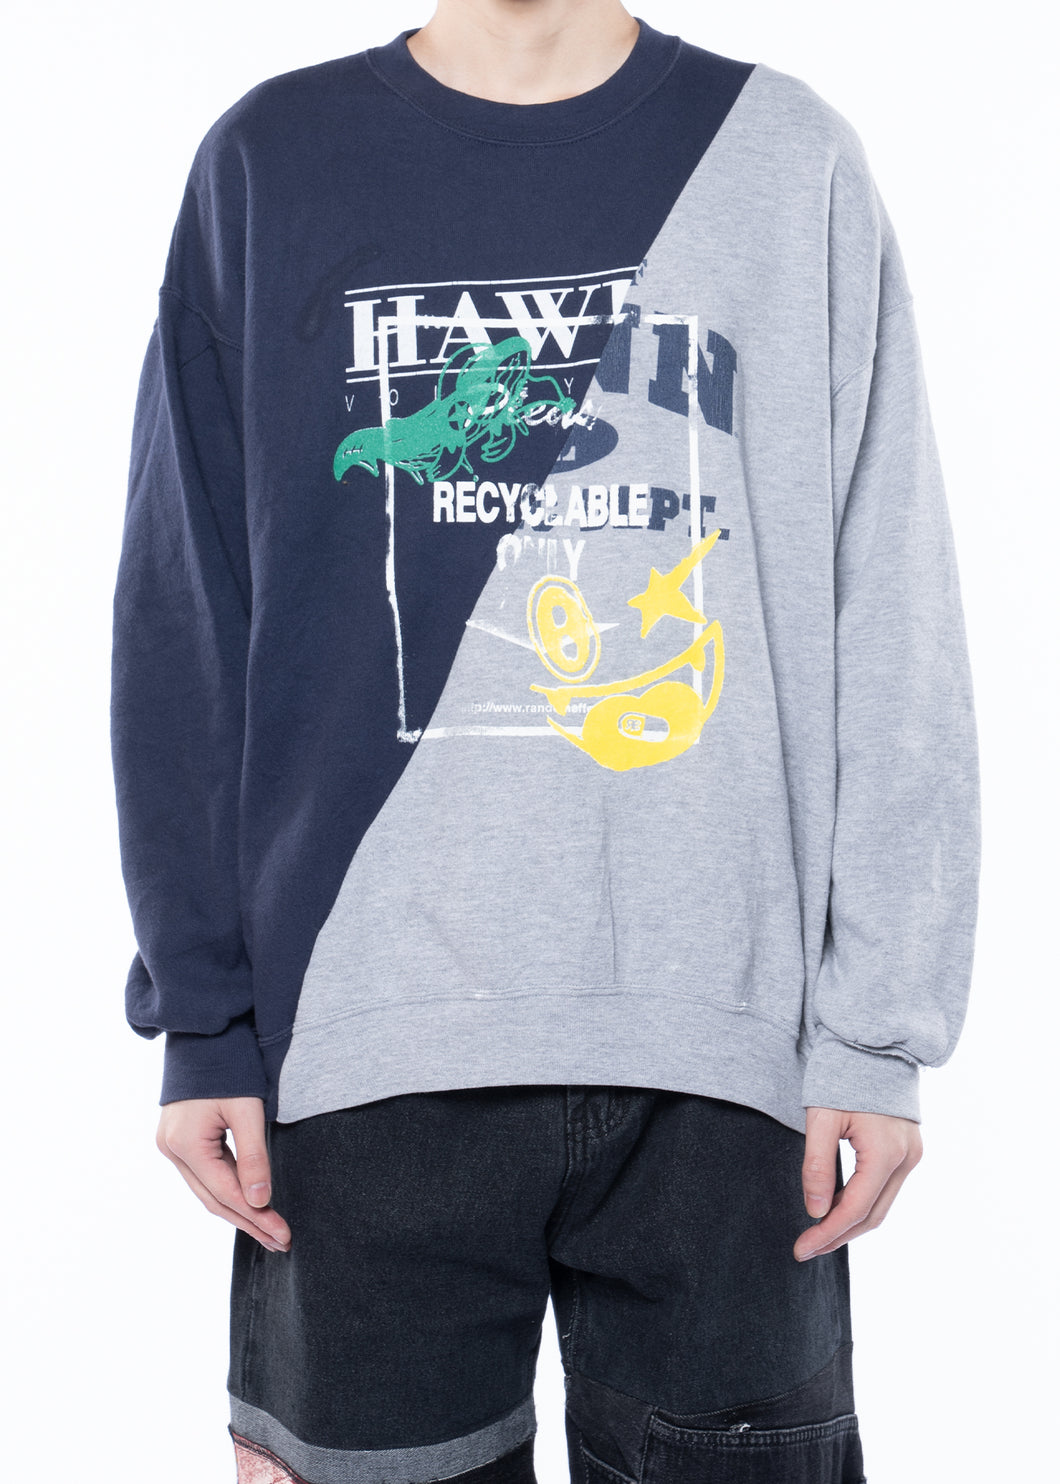 RANDOMEFFECT Patched Sweatshirt with Print